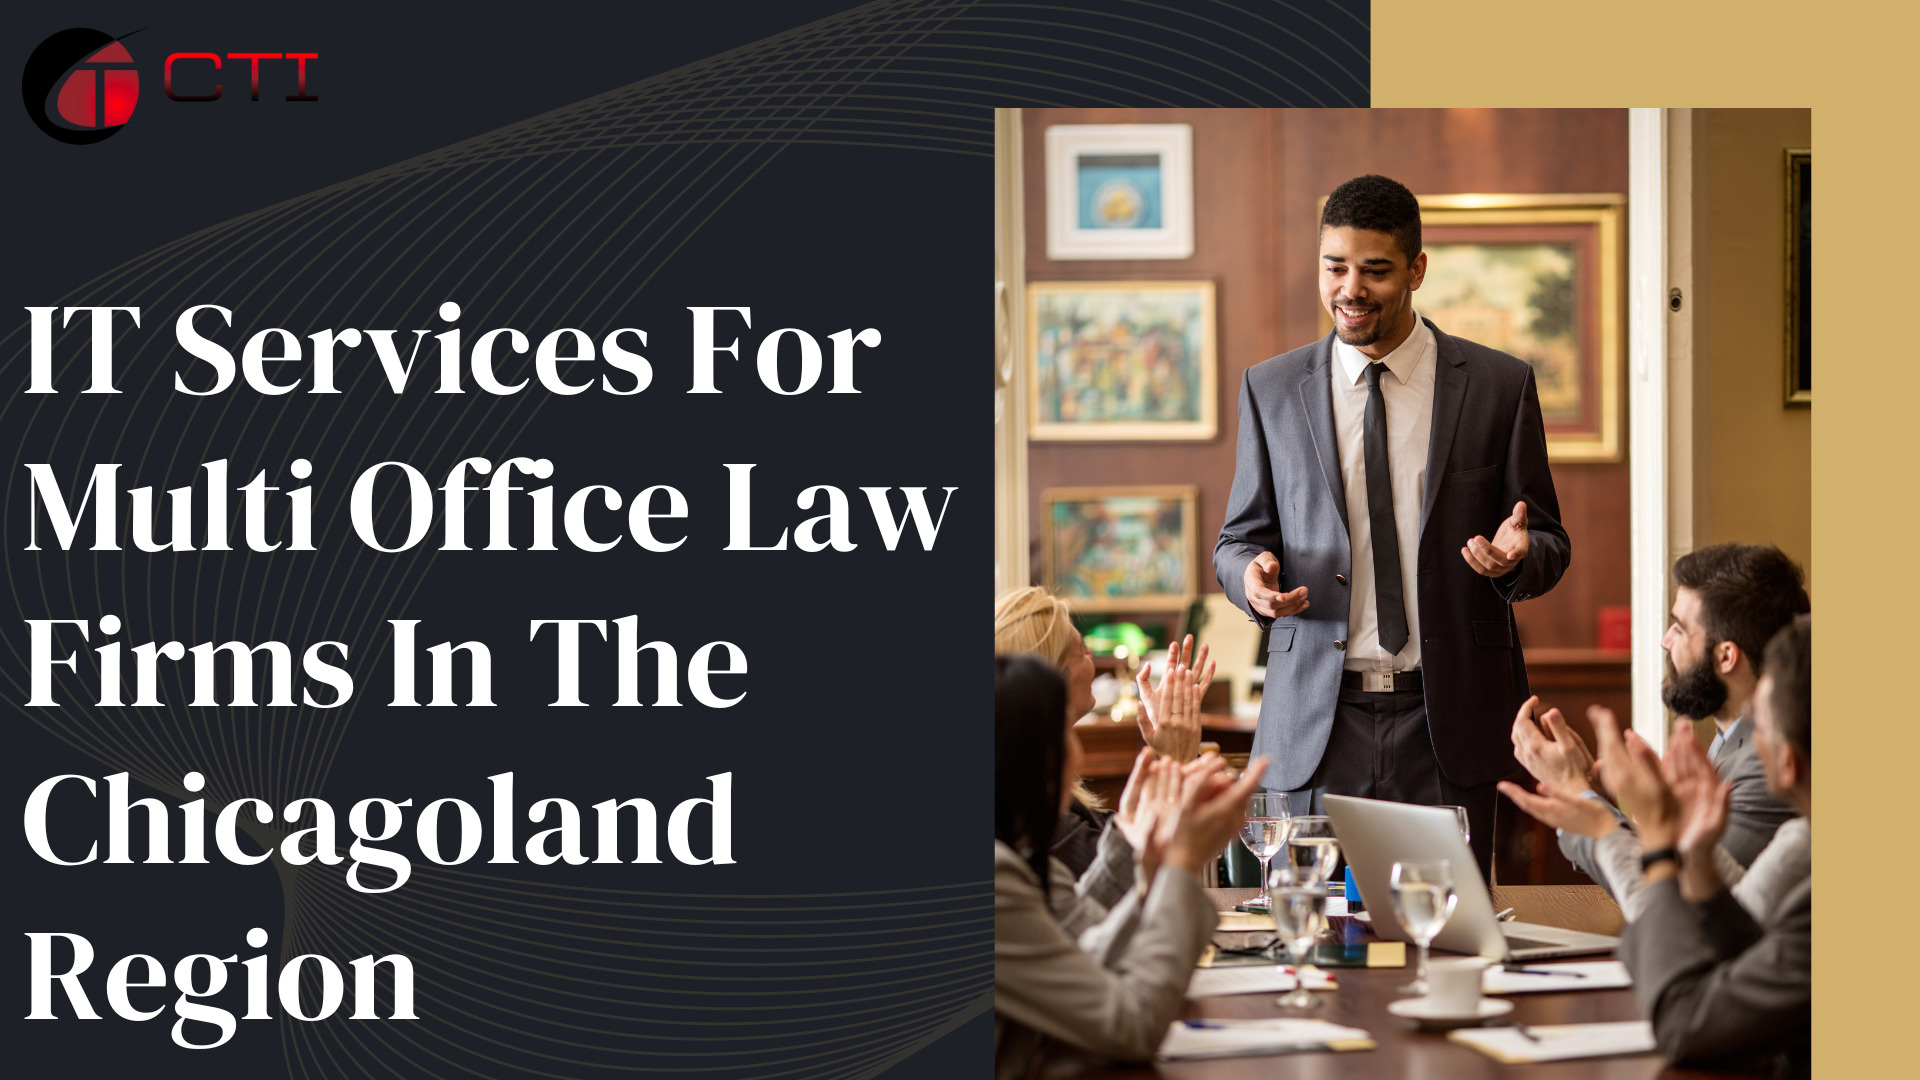 Who Provides IT Services To Multi-Location Law Firms Across The Chicagoland Region?